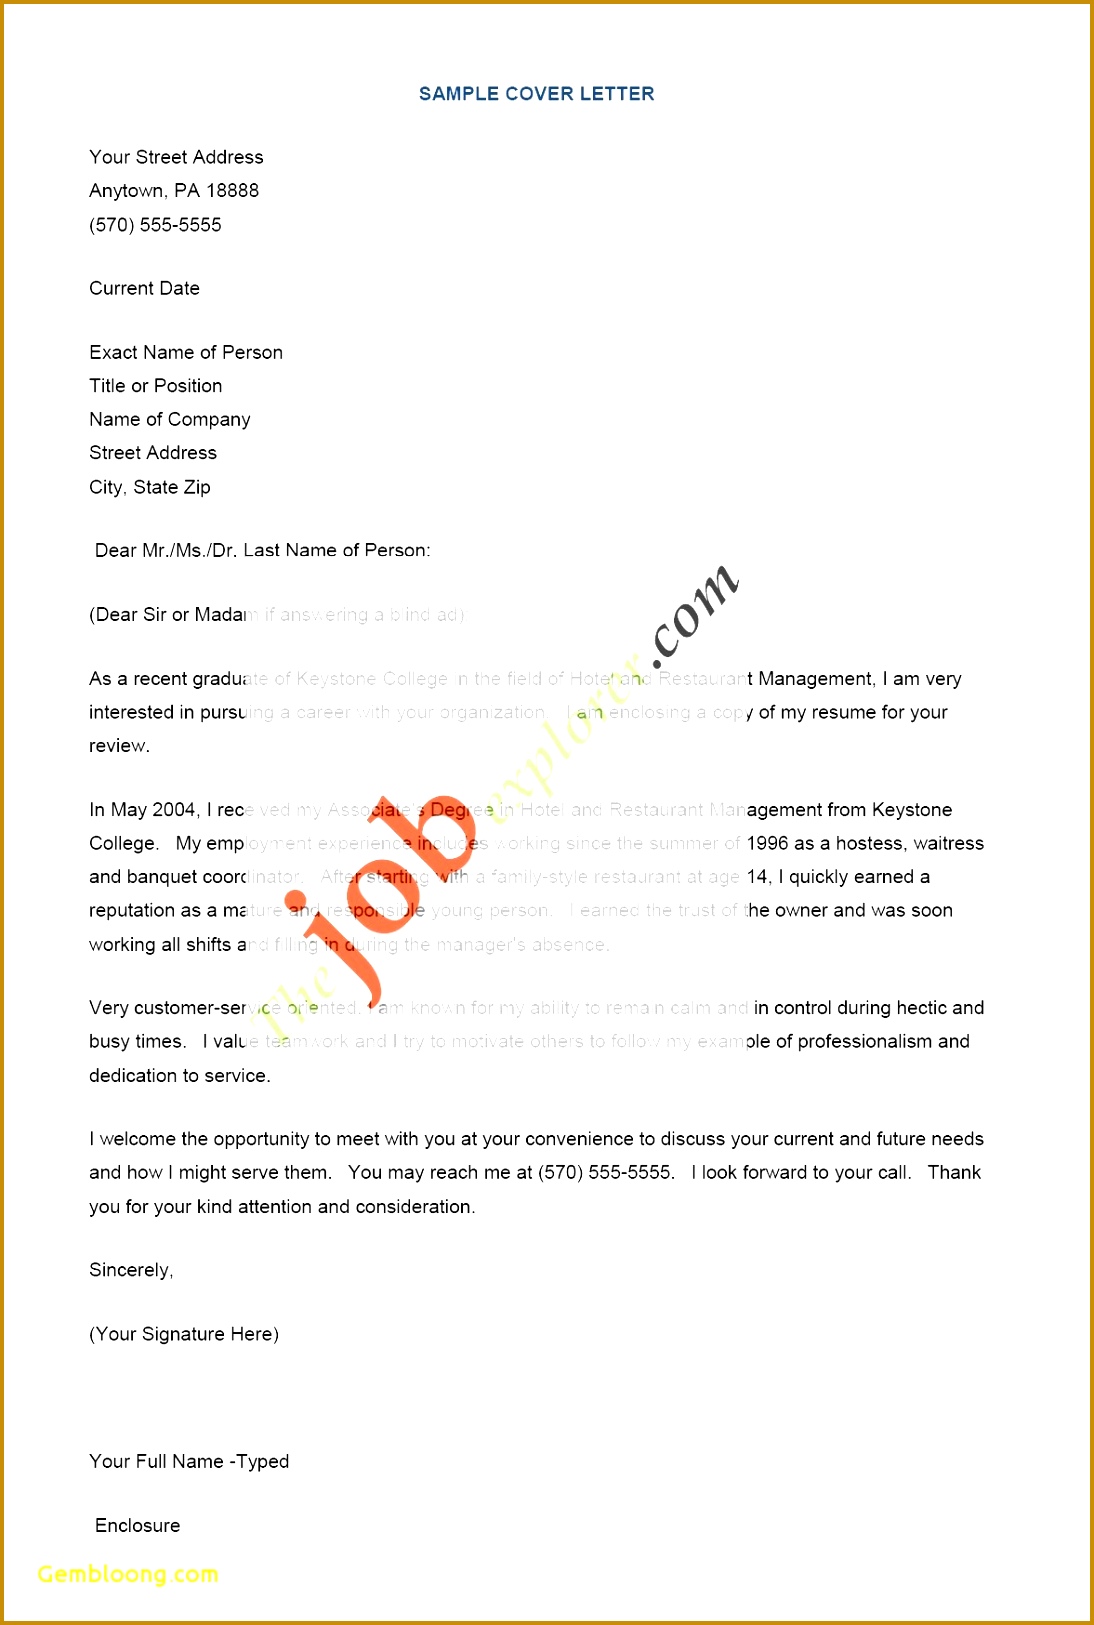 What is the Purpose Of A Cover Letter 10555 formet Resume Luxury How to format A Resume Best Cover Letter Lovely 16251094